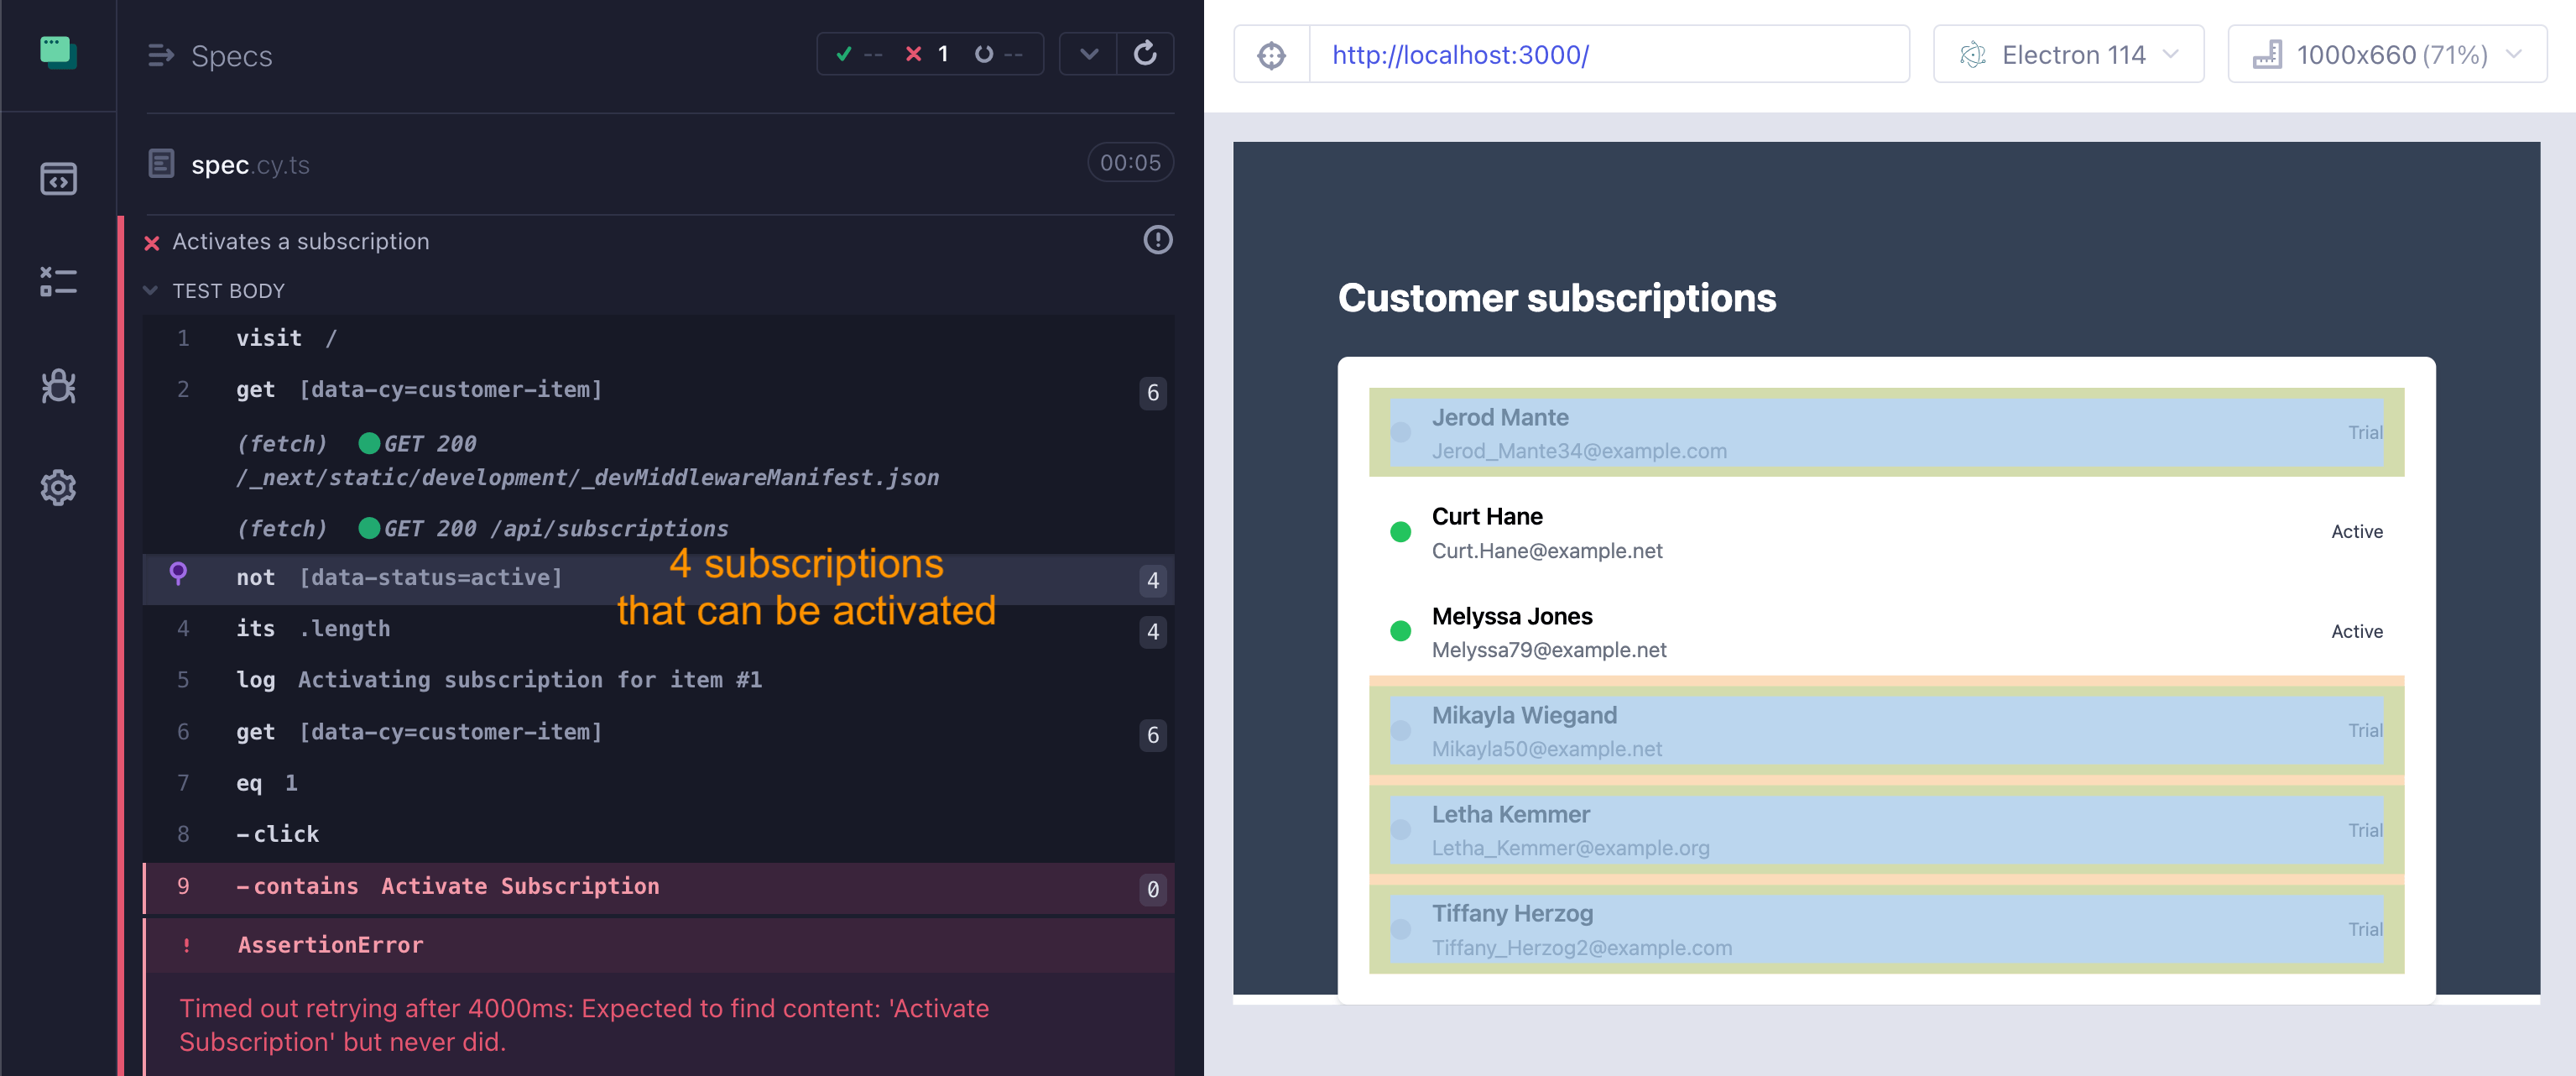 Subscriptions that can be activated